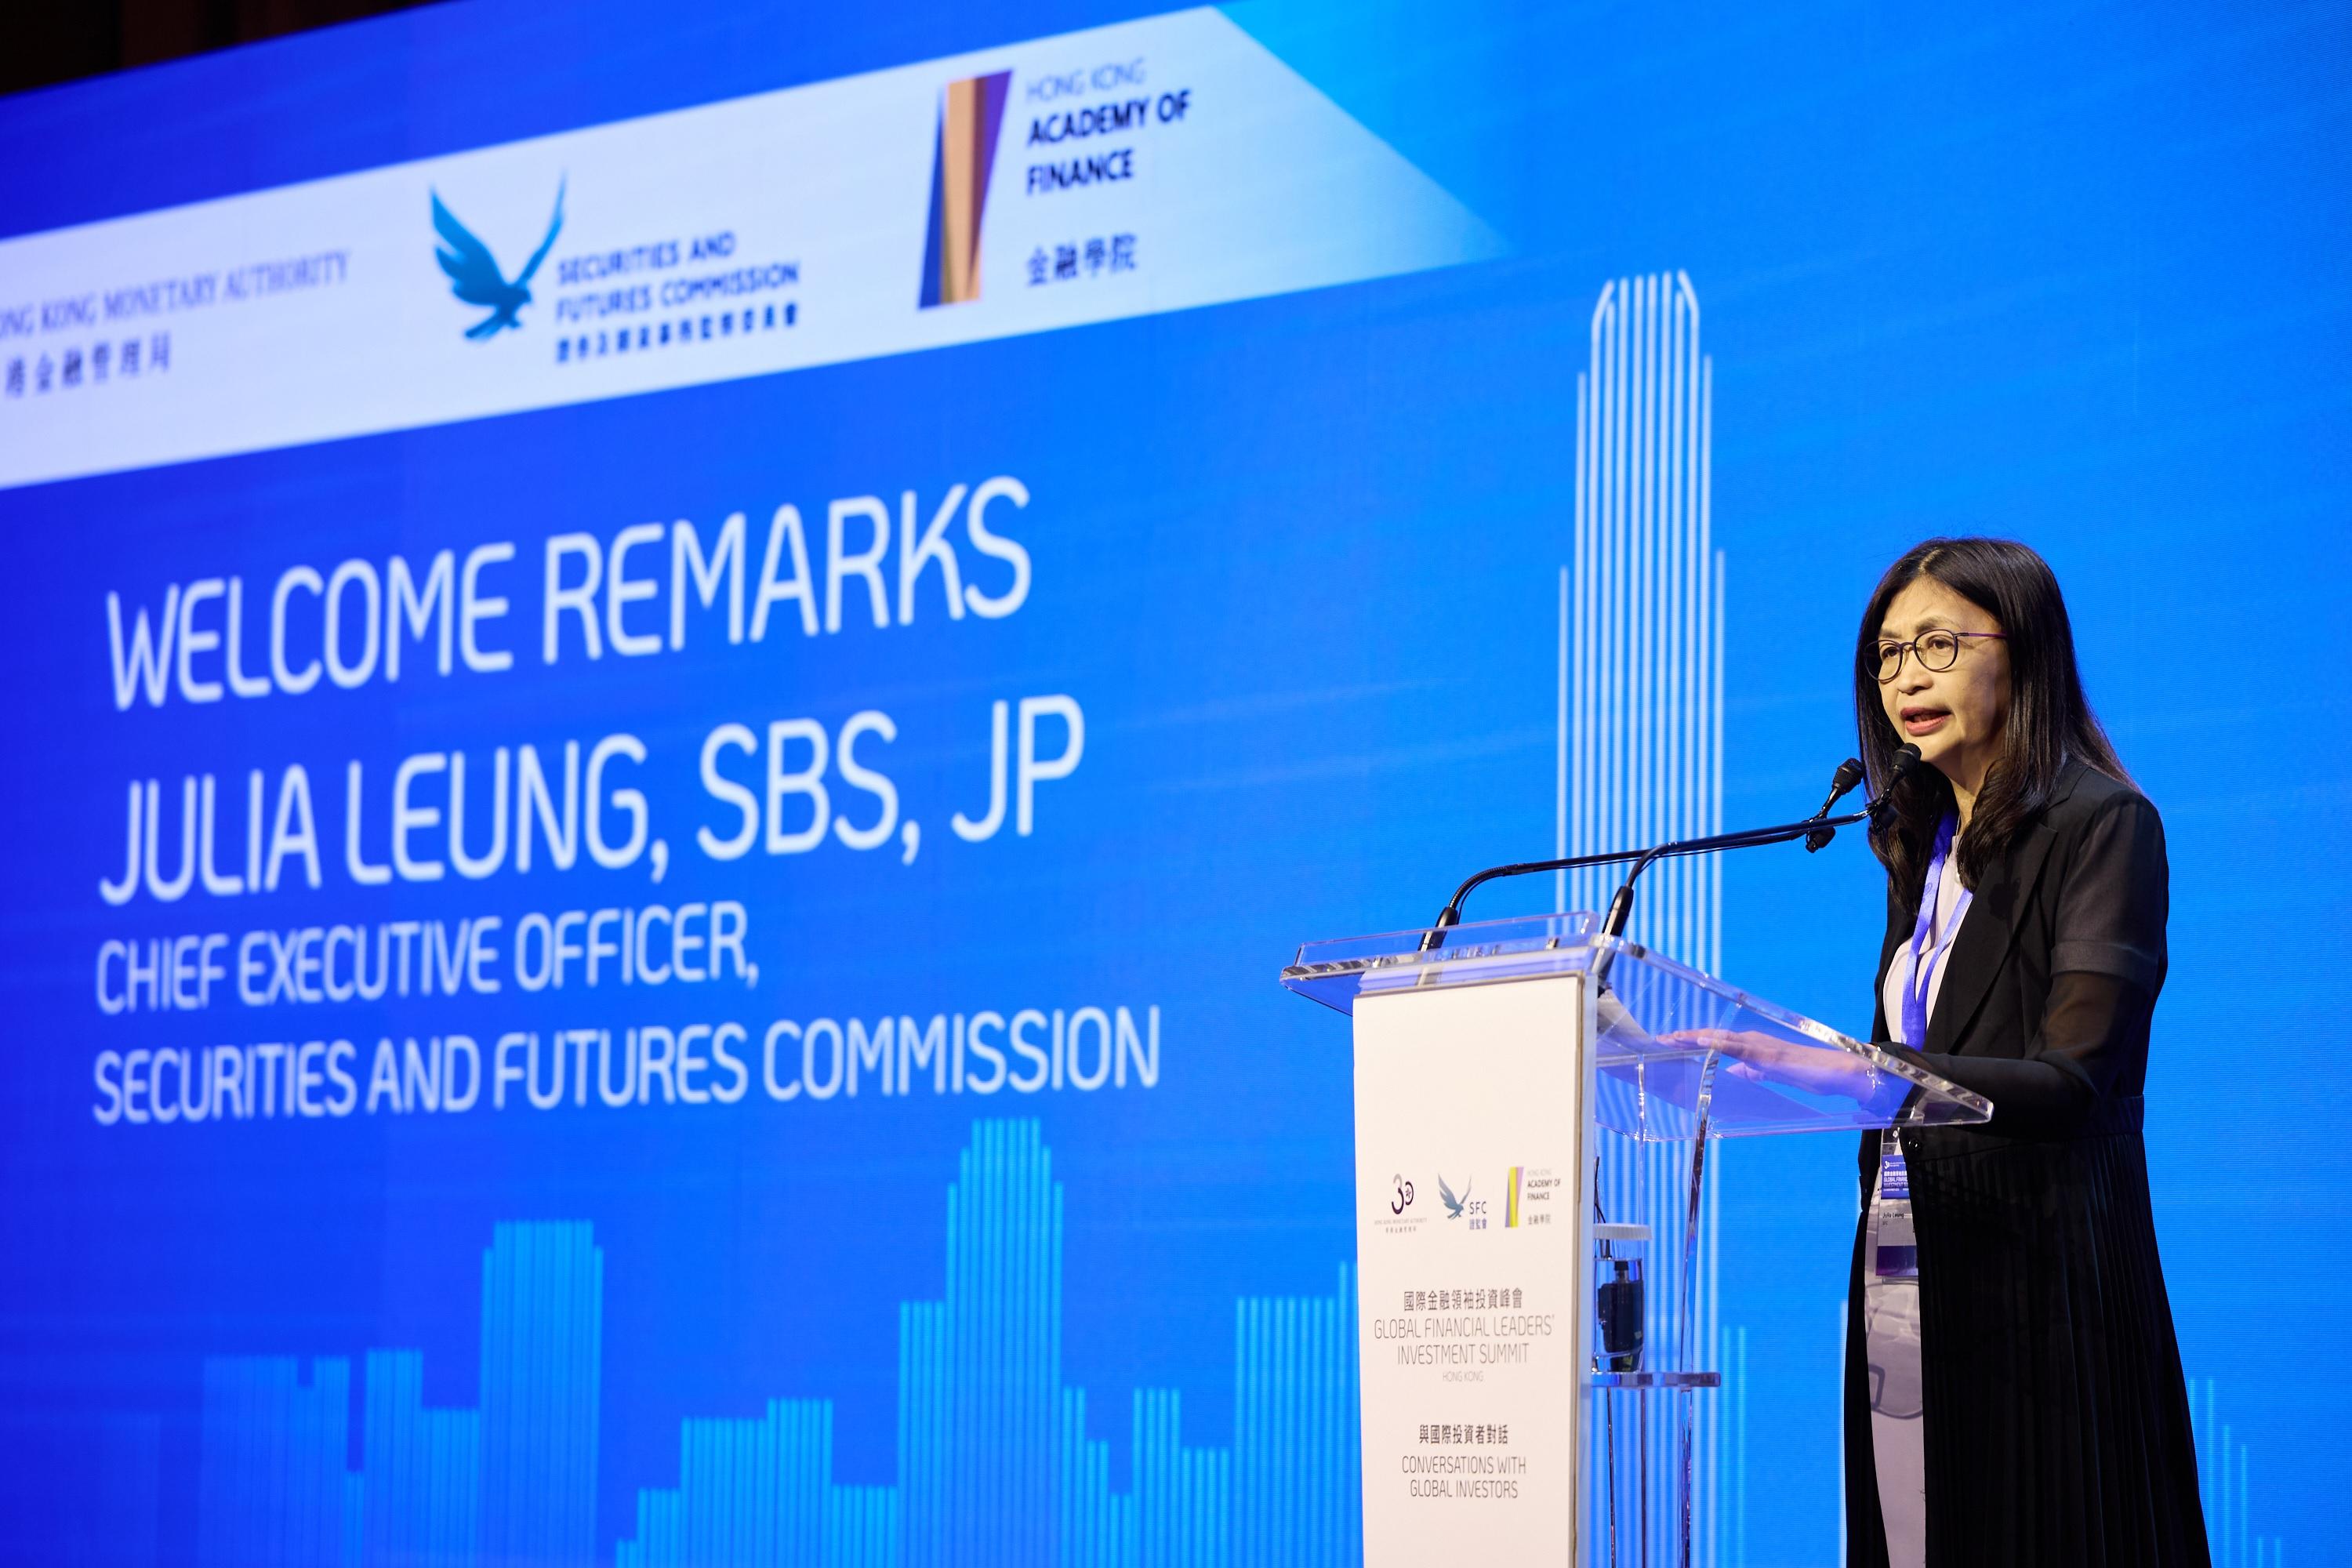 The Chief Executive Officer of the Securities and Futures Commission, Ms Julia Leung, delivers welcome remarks at the "Conversations with Global Investors" seminar of the Global Financial Leaders' Investment Summit today (November 8).